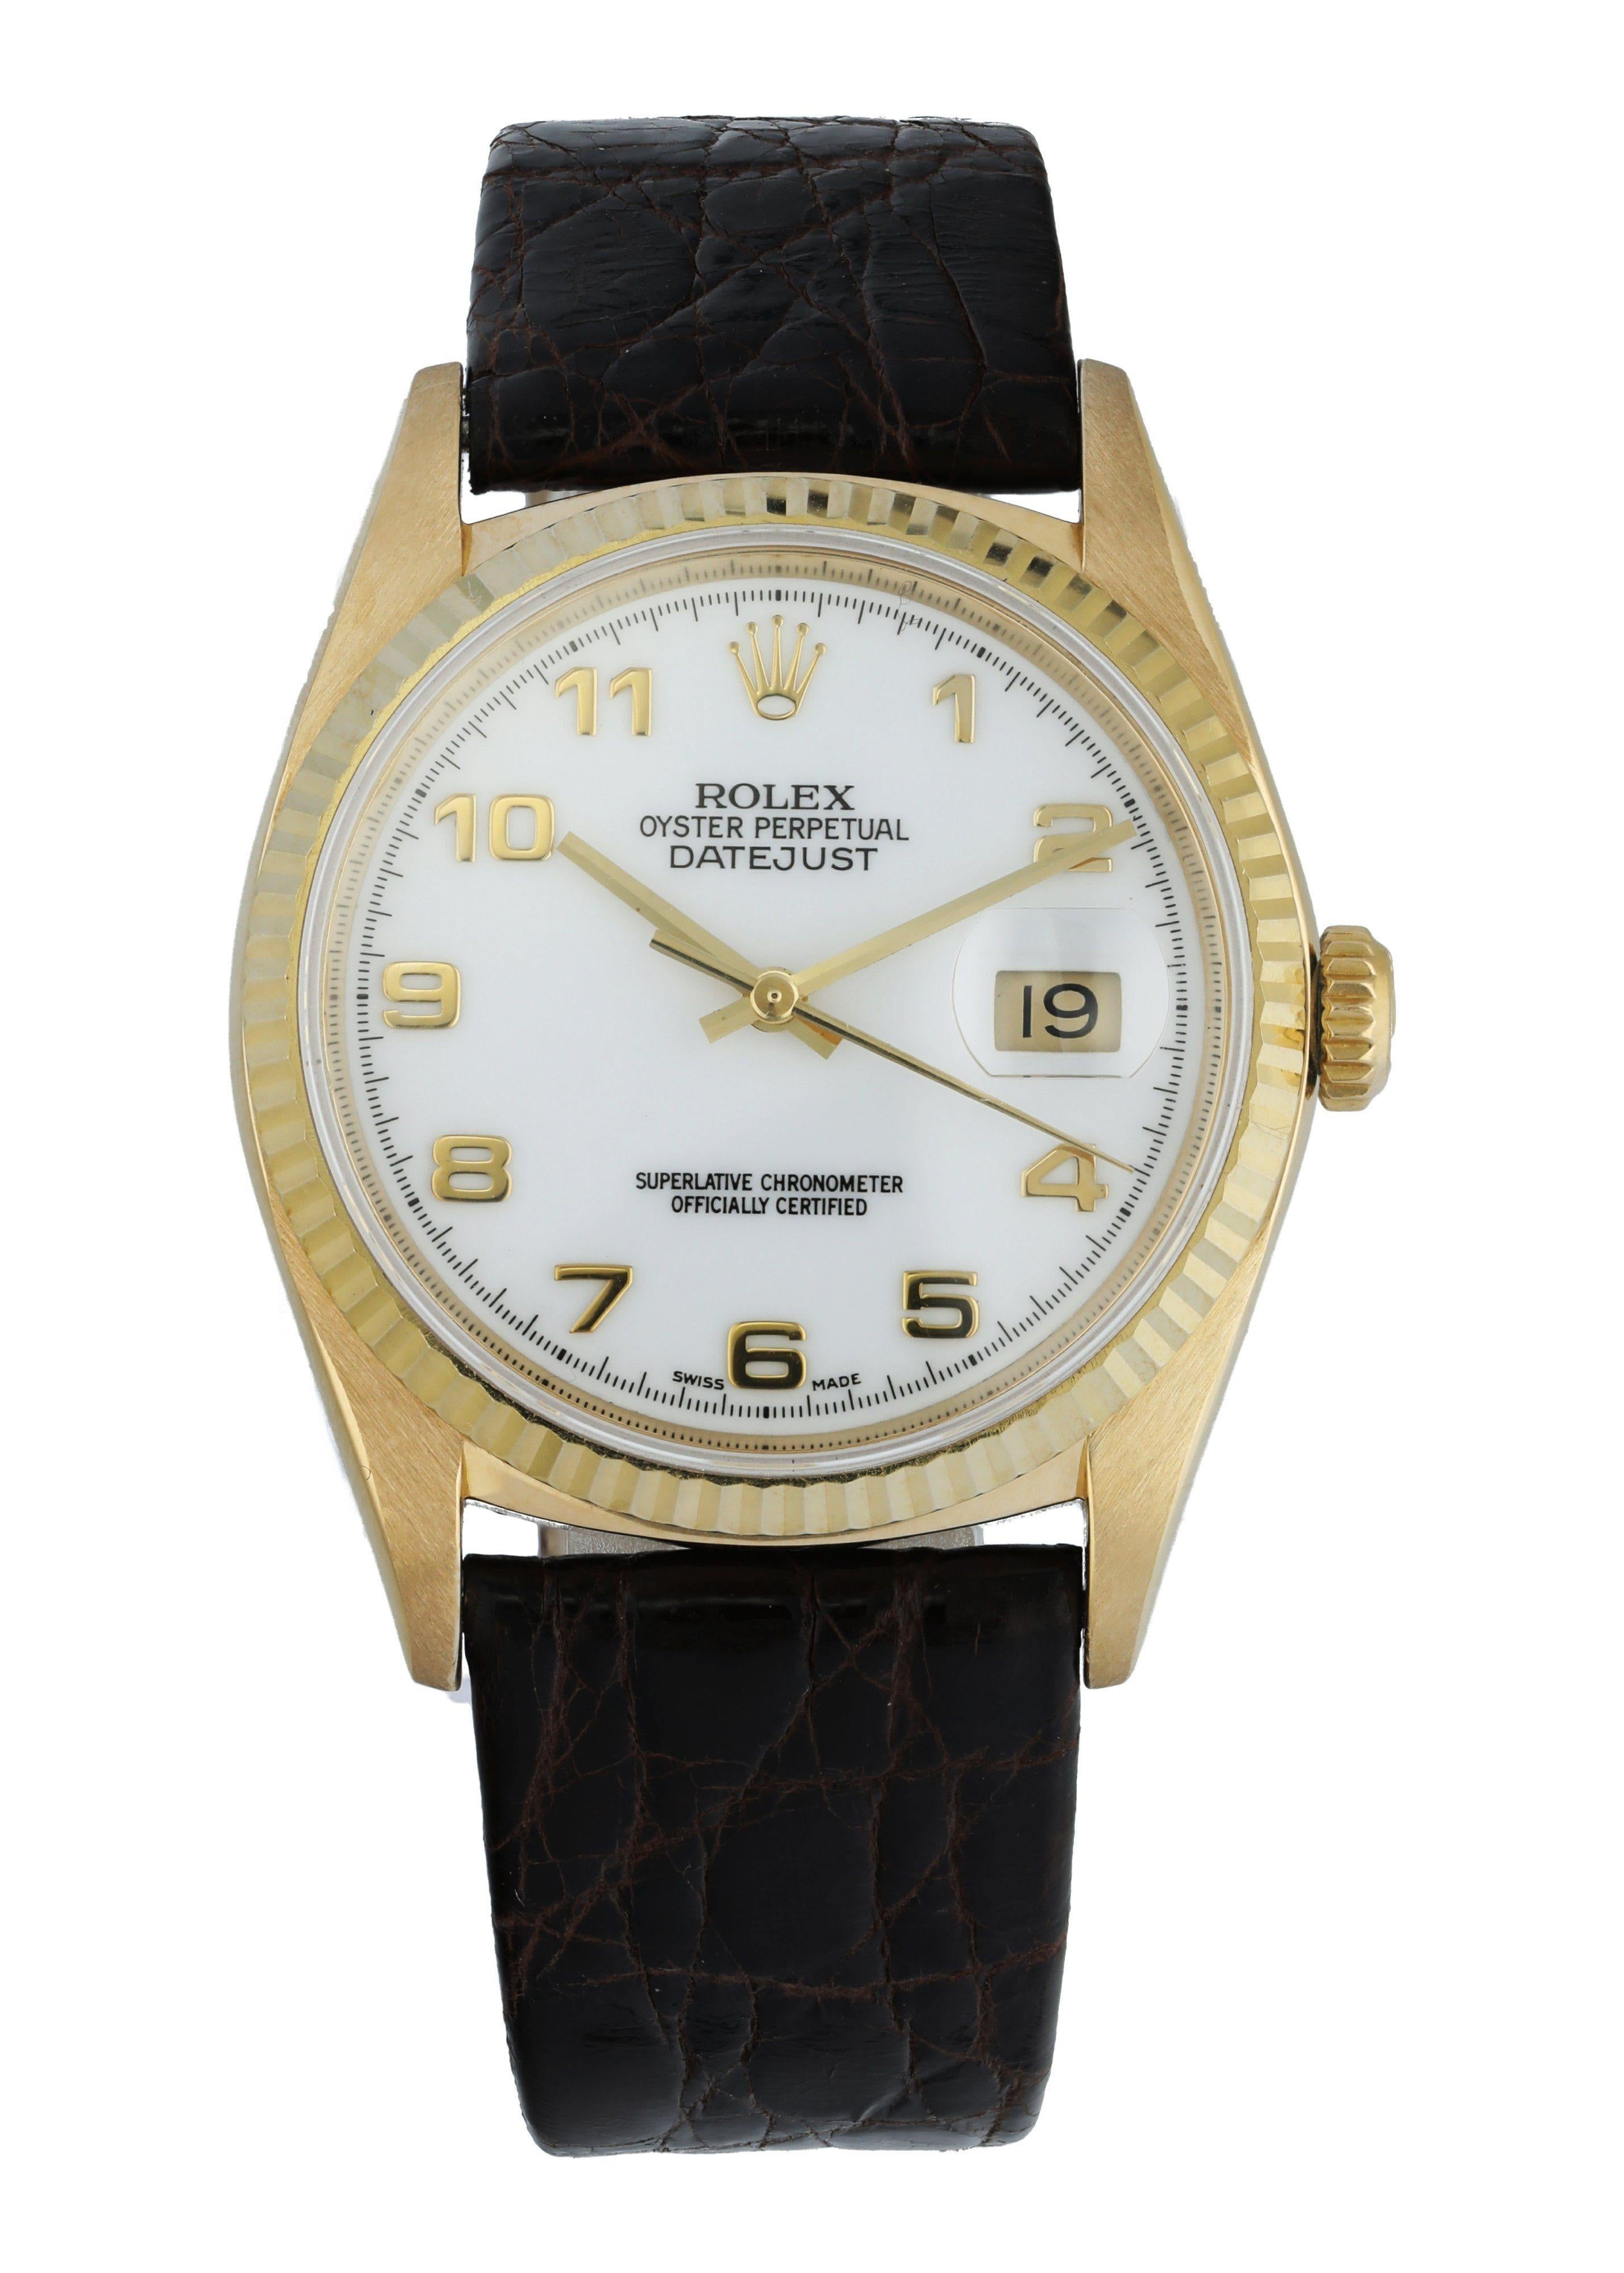 Rolex DateJust 16238 Men's Watch
36mm 18k Yellow Gold case. 
Yellow Gold fluted bezel. 
White dial with gold hands and Arabic numeral hour markers. 
Minute markers on the outer dial. 
Date display at the 3 o'clock position. 
Leather Crocodile Strap